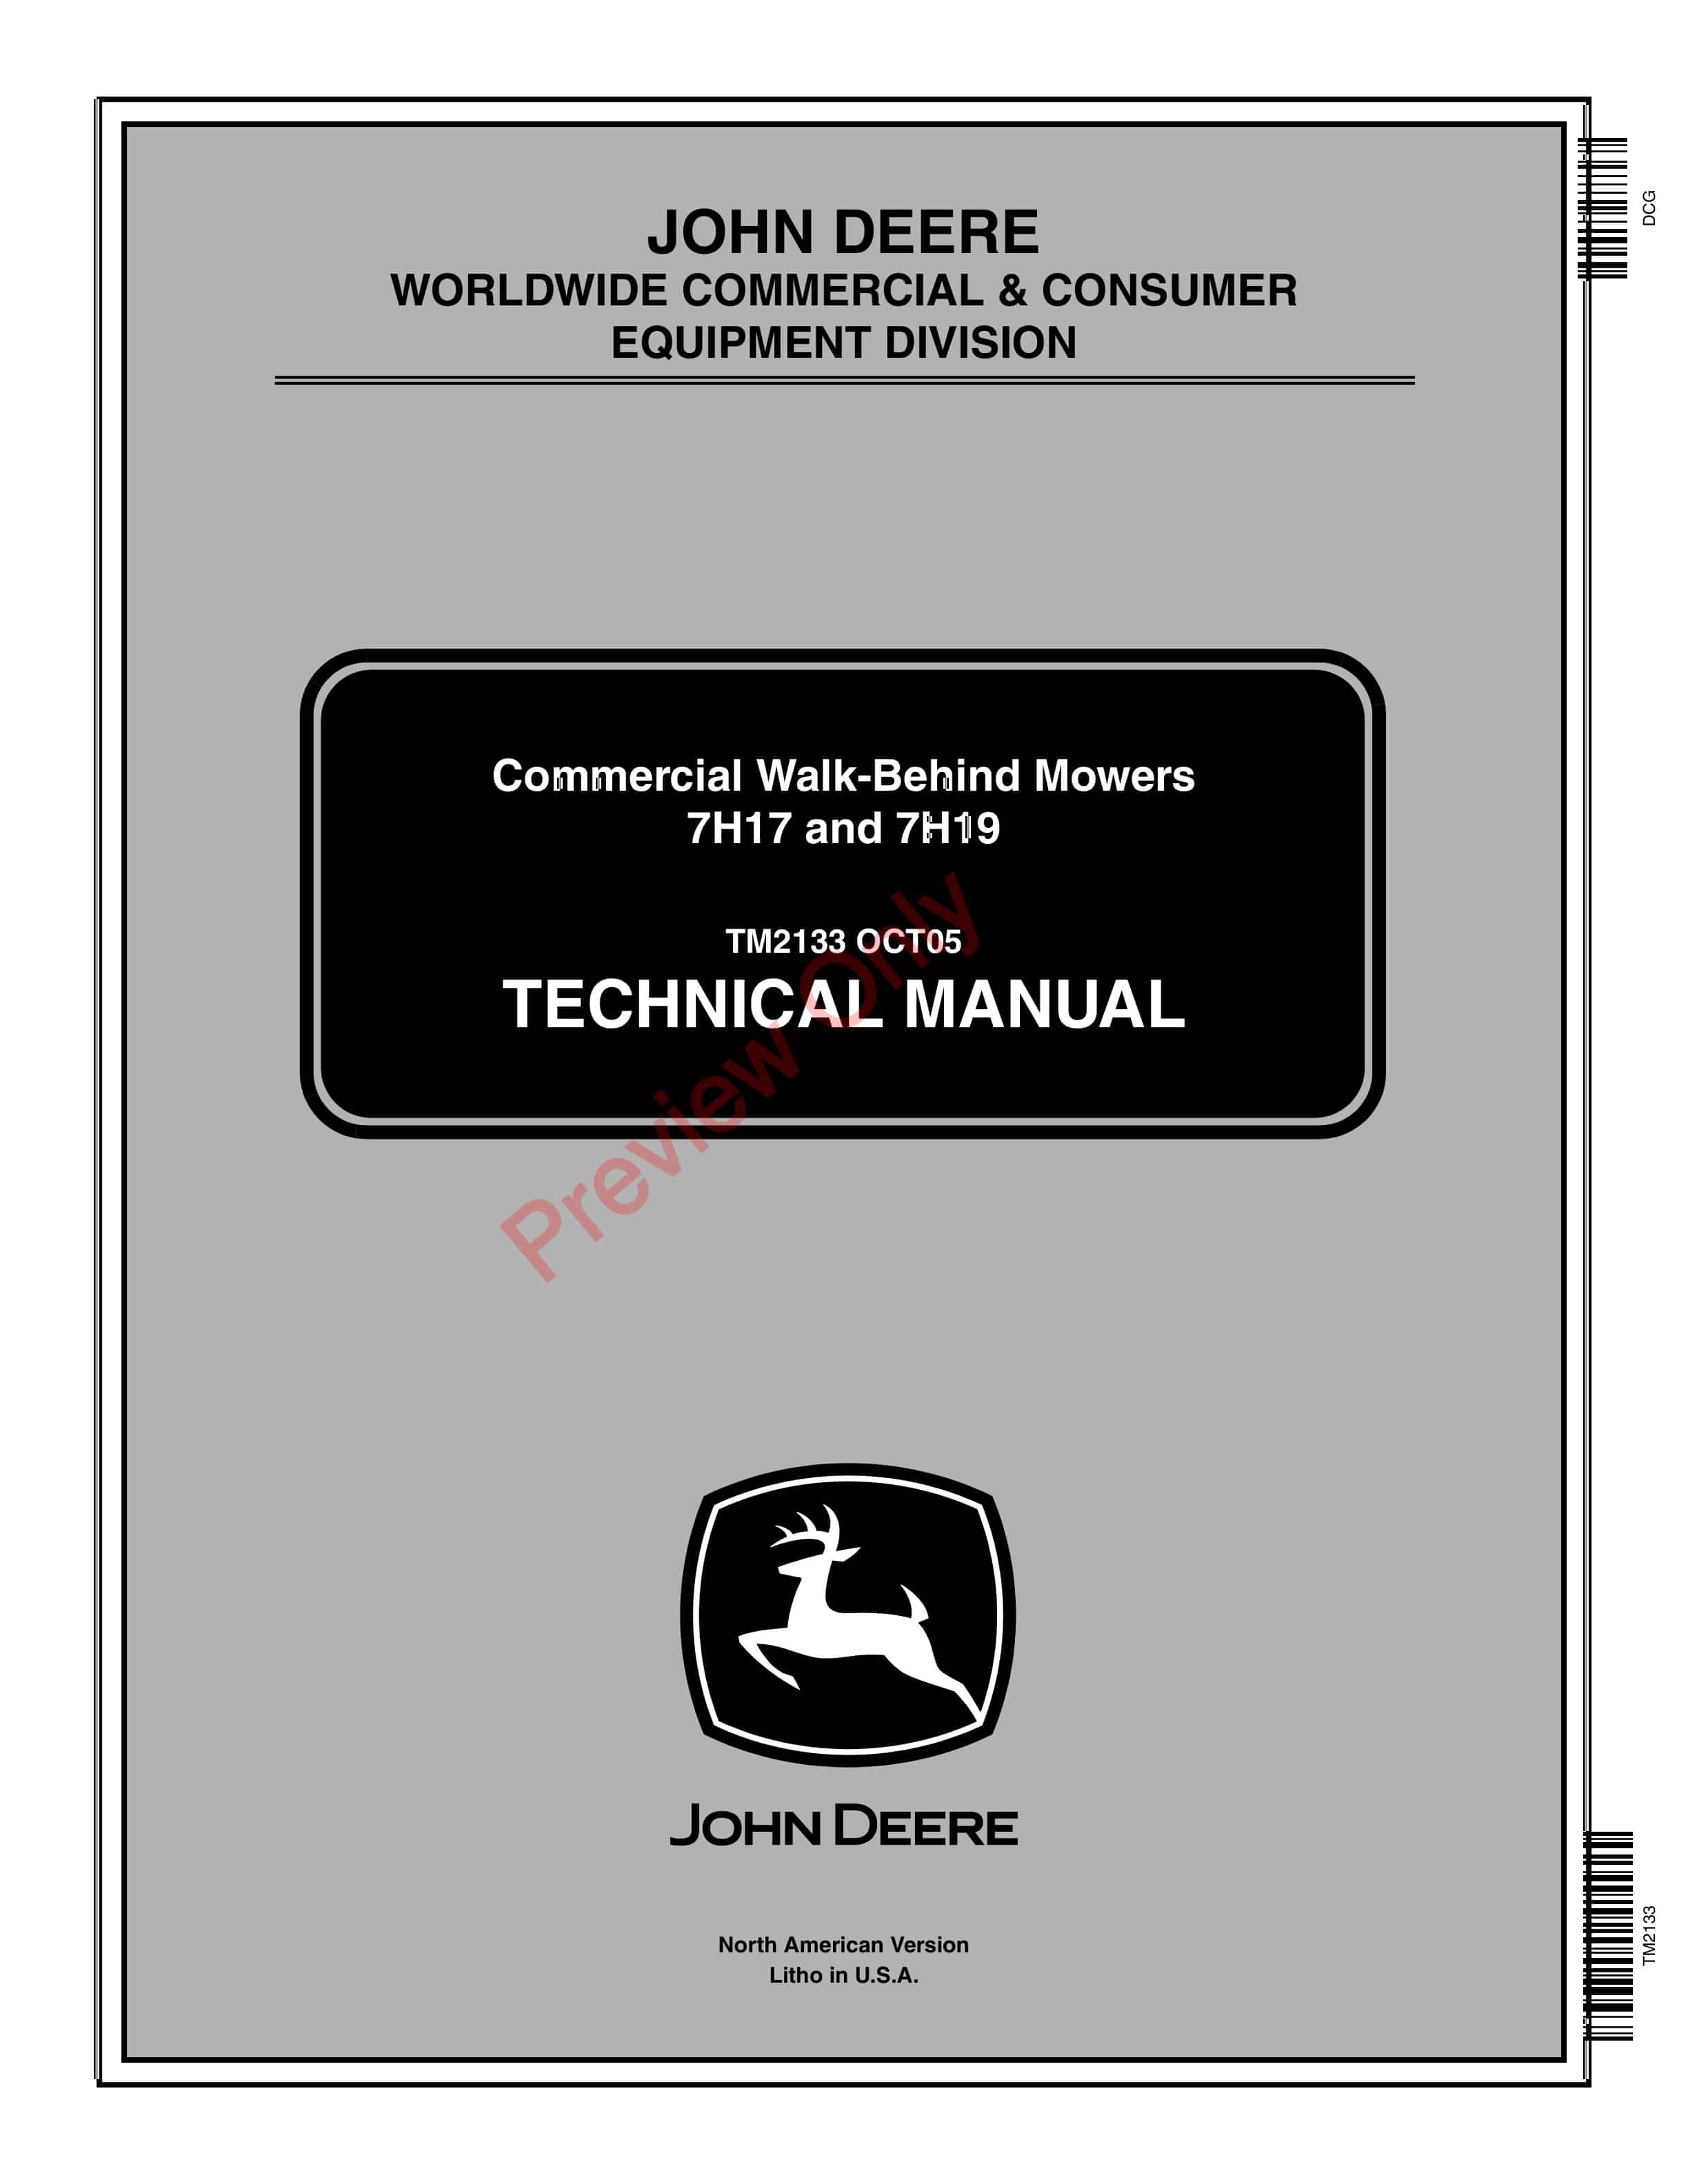 John Deere 7H17and 7H19 Commercial Walk-Behind Mower Technical Manual TM2133 01OCT05-1